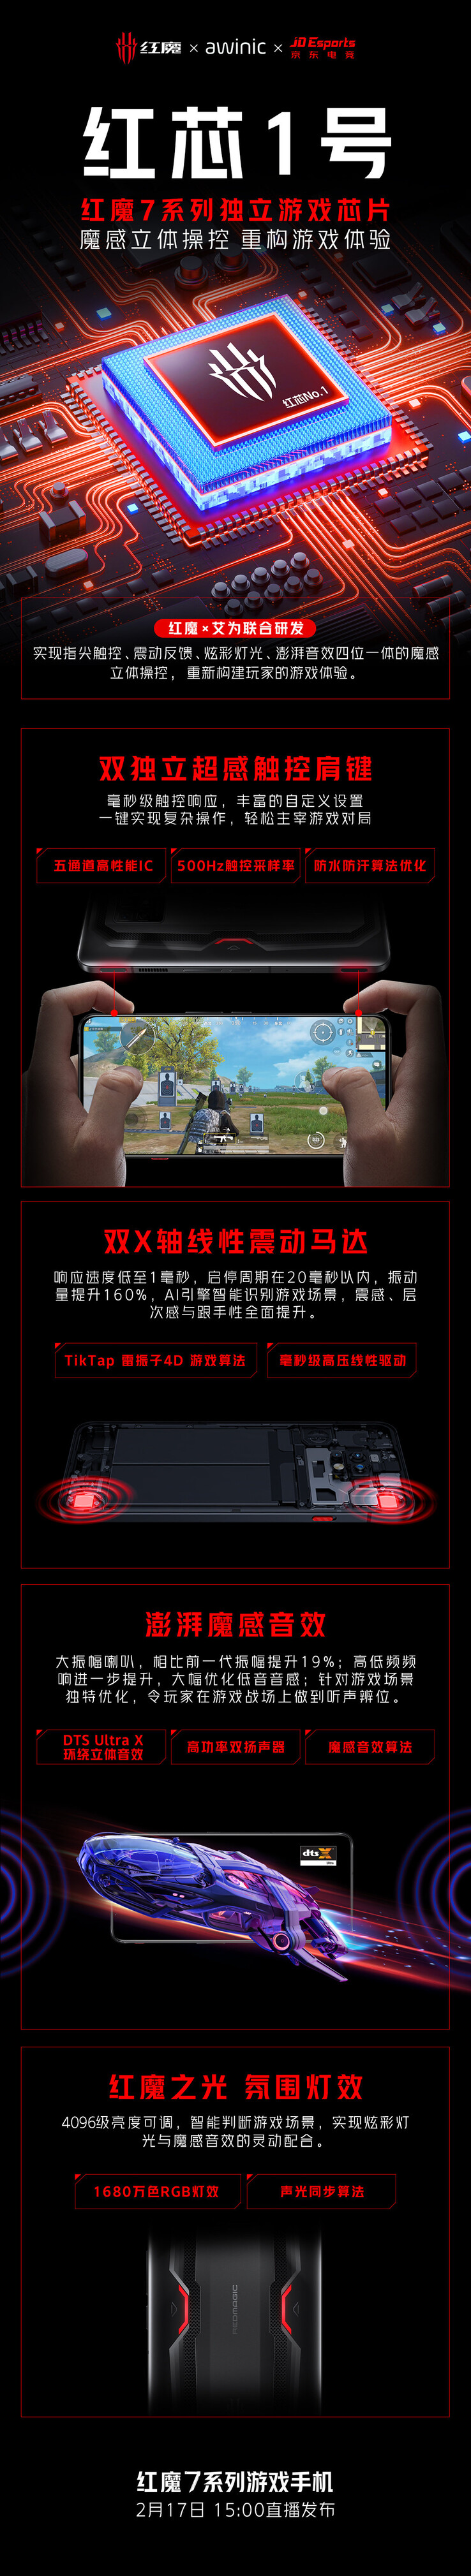 The Red Core 1 is touted to be part of the RedMagic 7 series on its launch. (Source: RedMagic via Weibo)